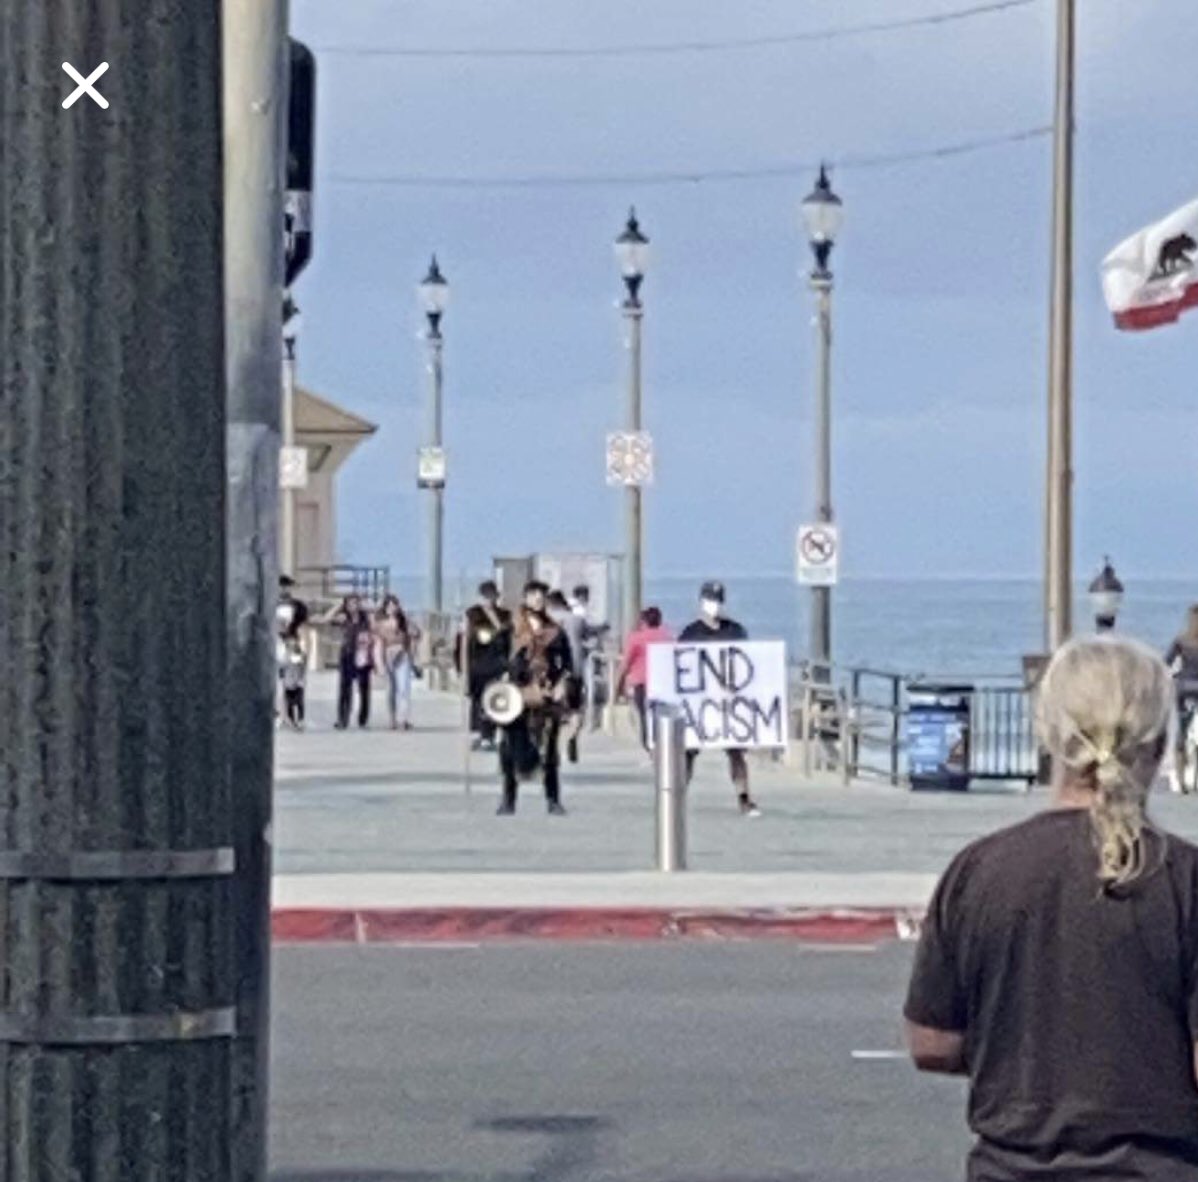 Antifa, BLM and other “Agitorgs” are setting up already in Huntington Beach CA. They are all being bussed and imported in- these agitators do NOT live in the cities they are coming in to destroy. They’re putting on a show & they are taking ‘stage orders.’ At our expense of course